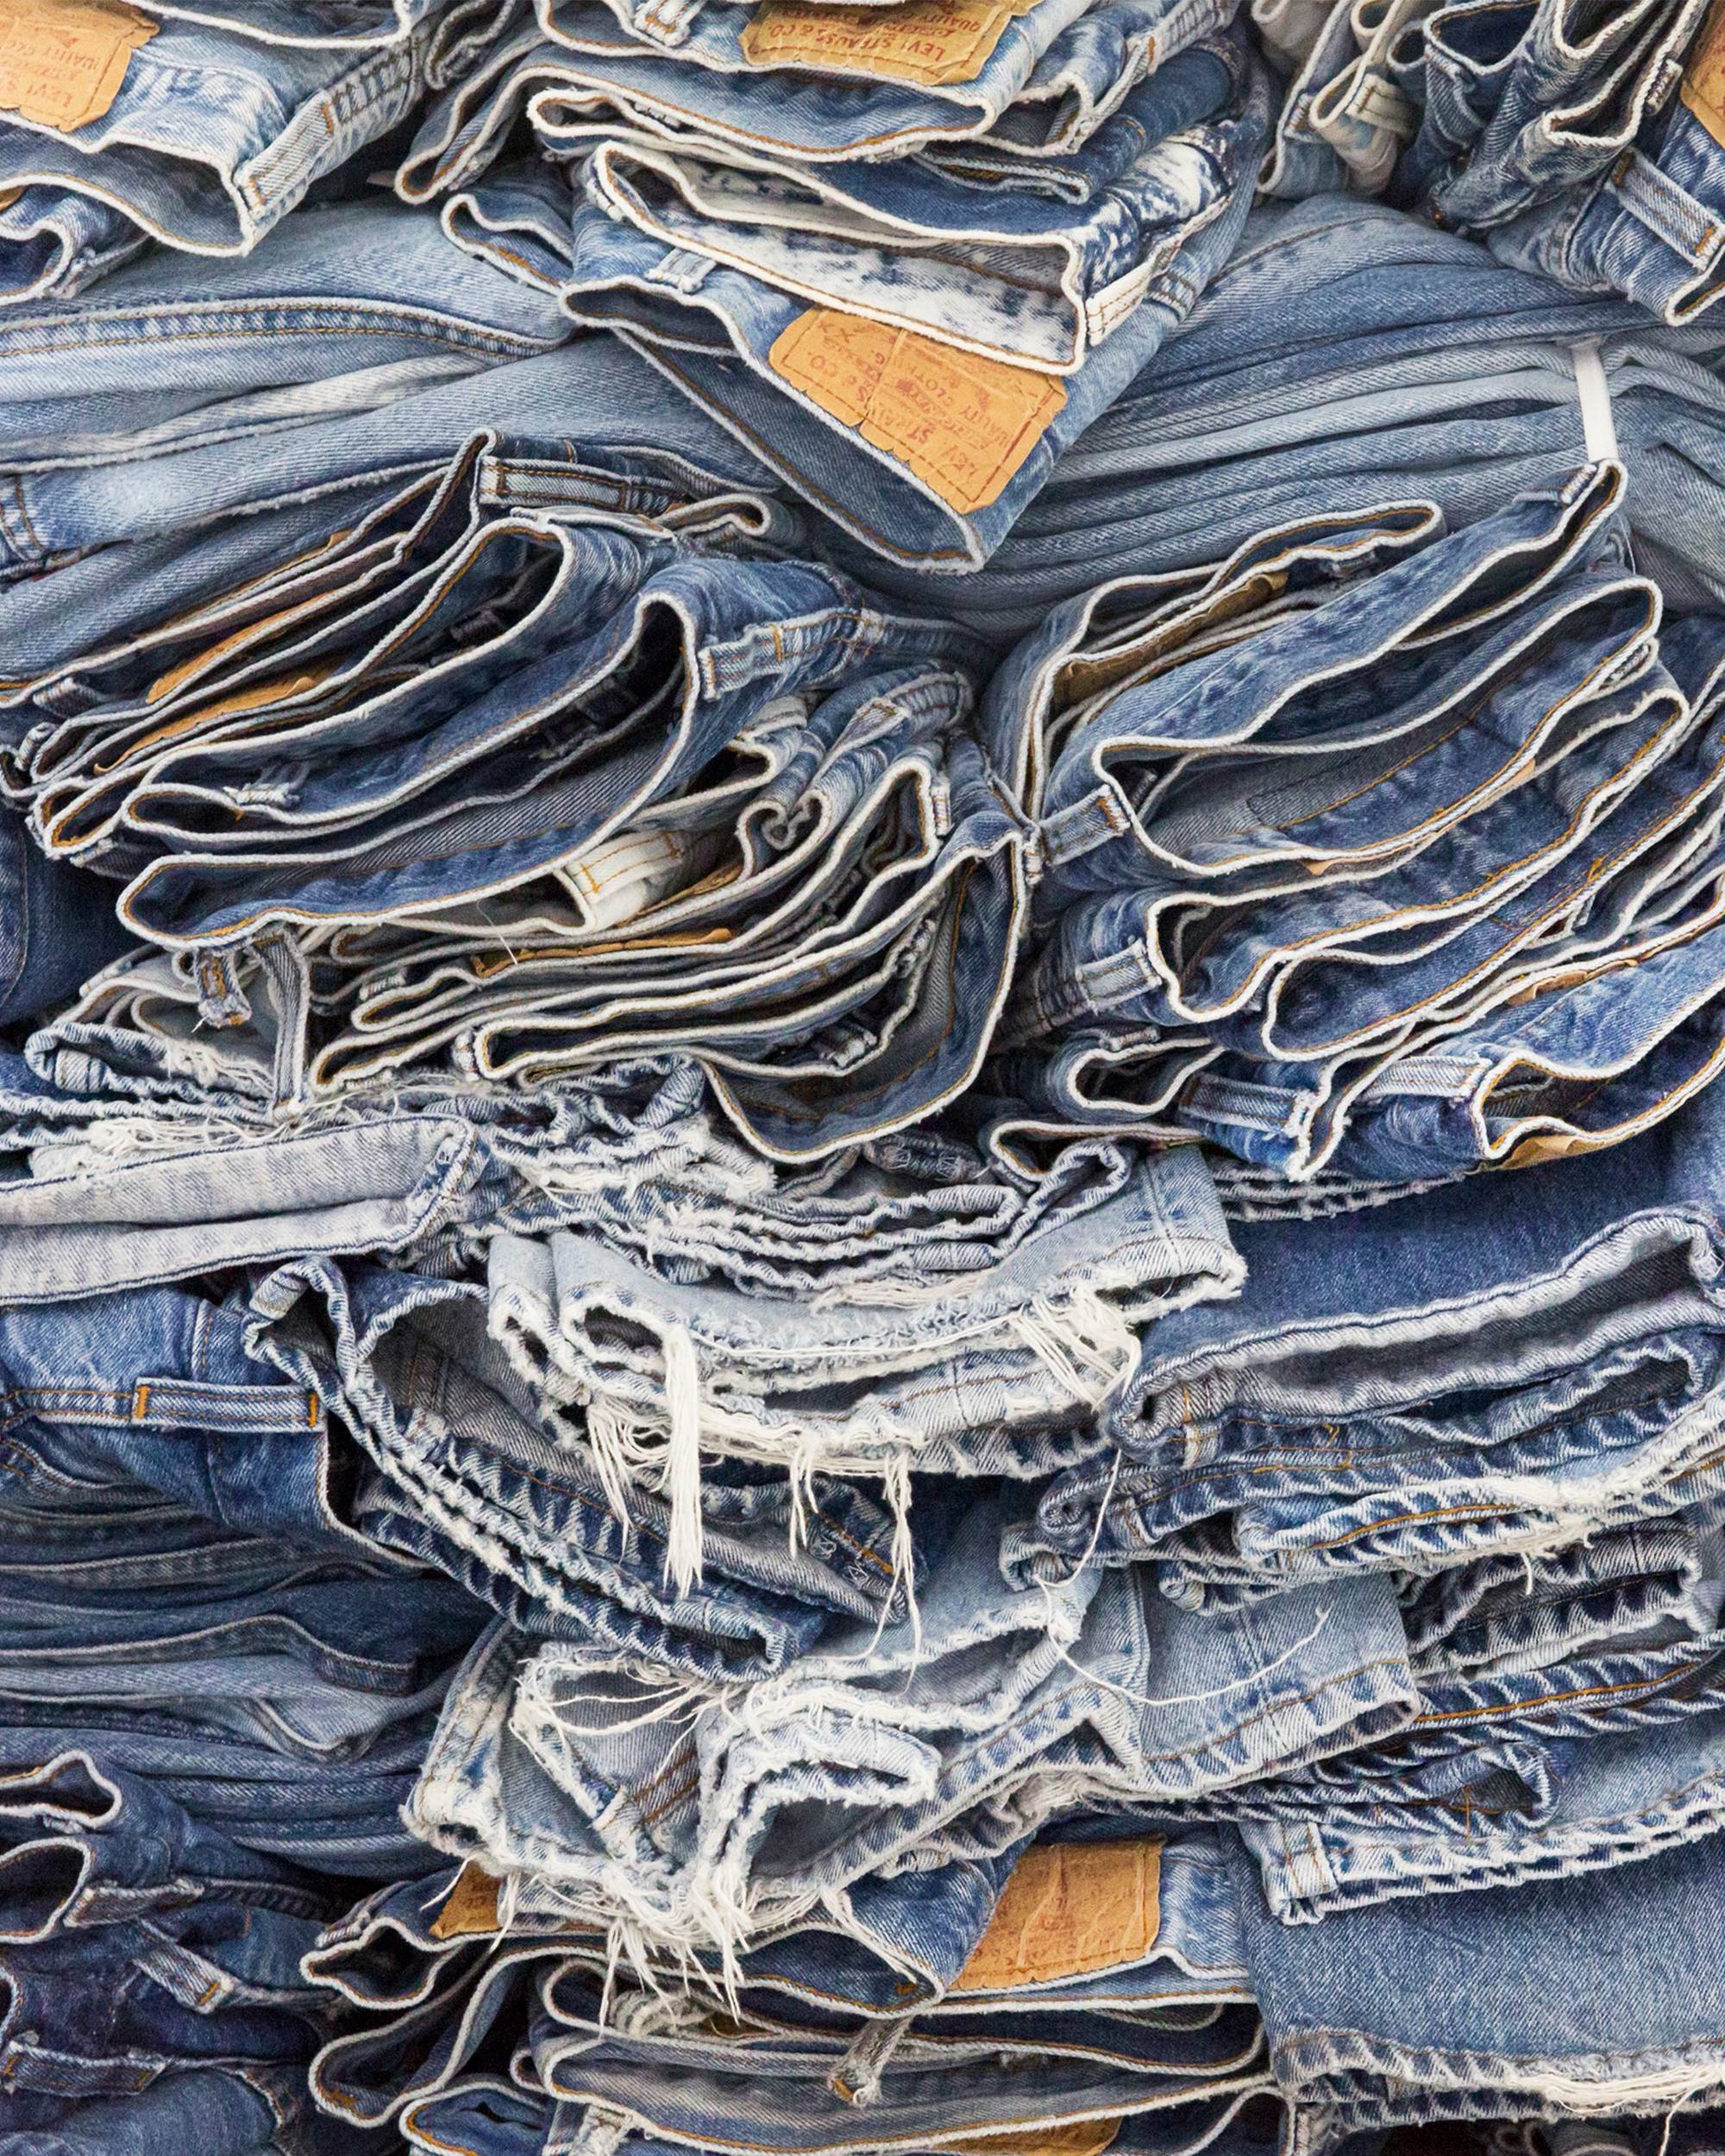 jeans stacked on top of each other